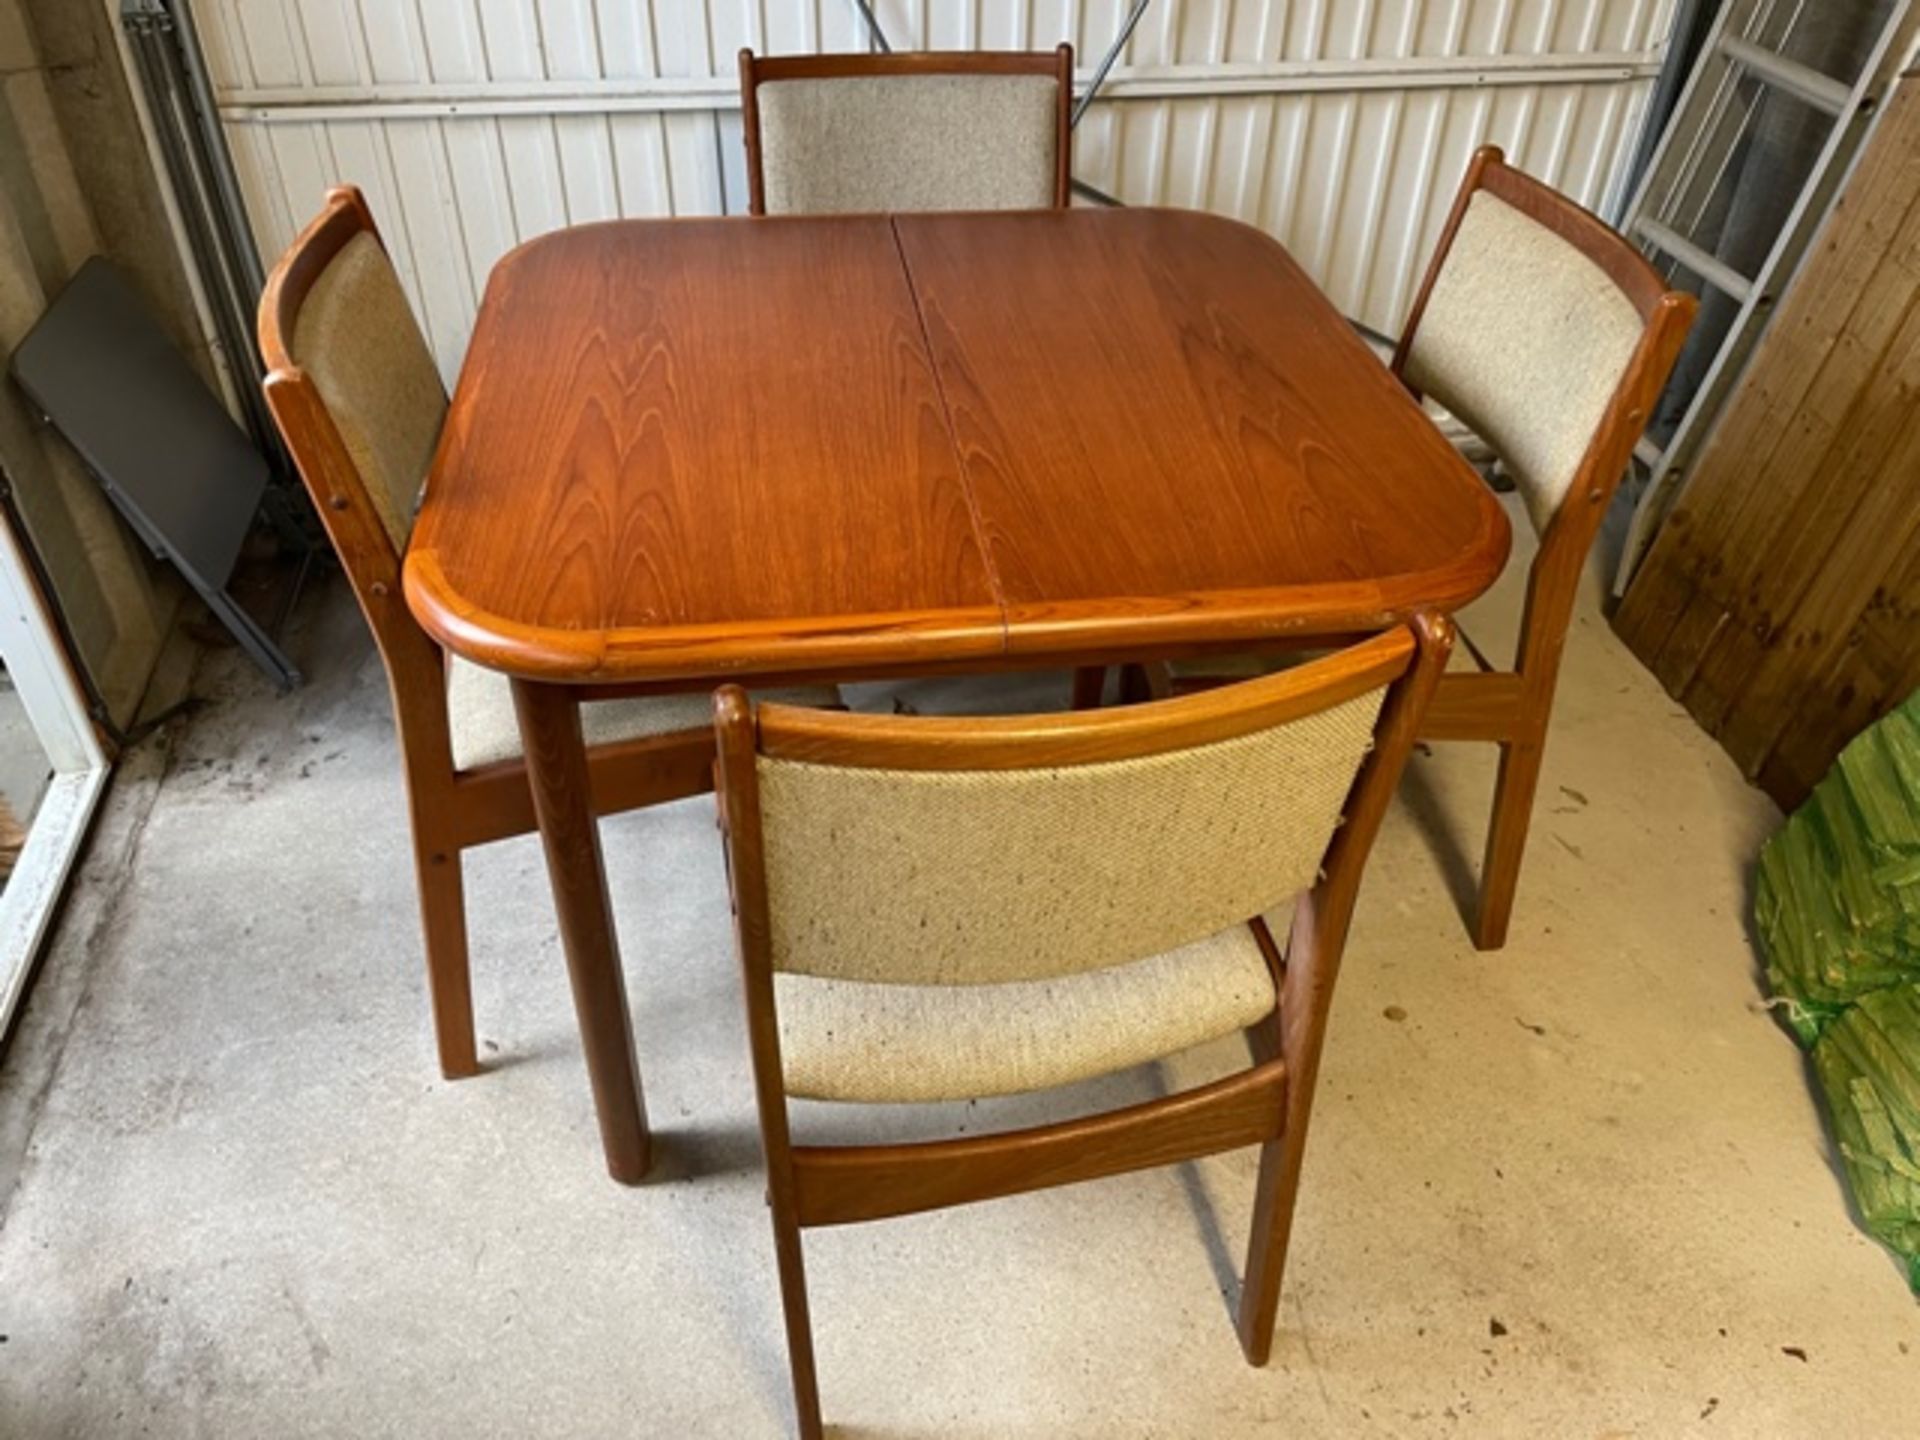 1 x G Plan Teak Dining Suite With Extendable Table and 4 Upholstered Teak Chairs - CLTBC - Location: - Image 2 of 4